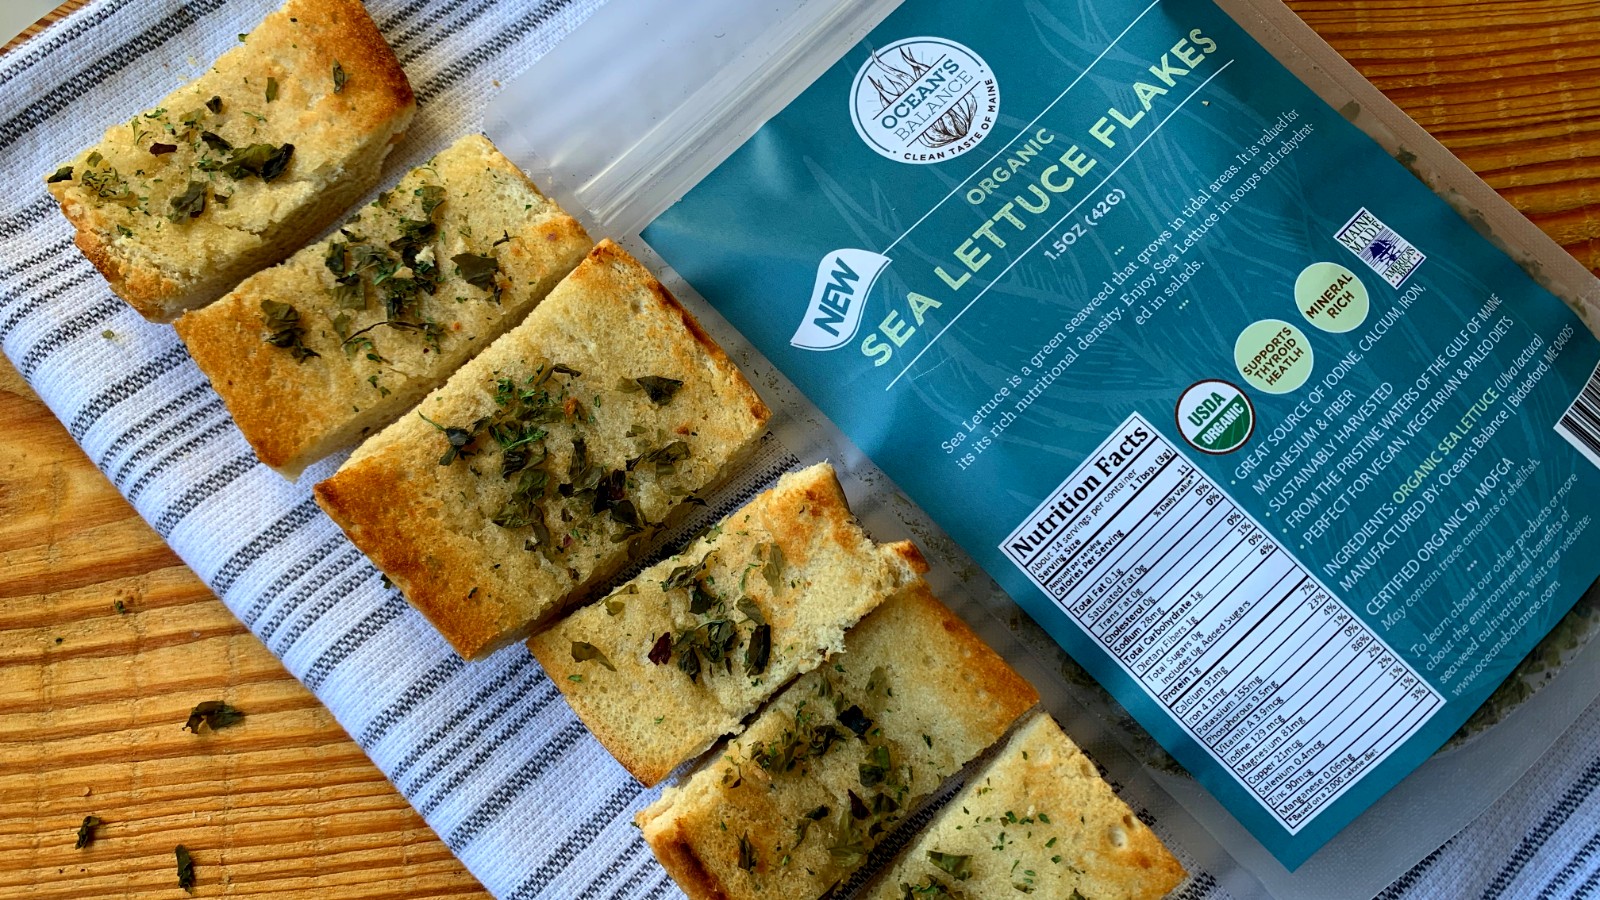 Image of Garlic Bread with Sea Lettuce Flakes